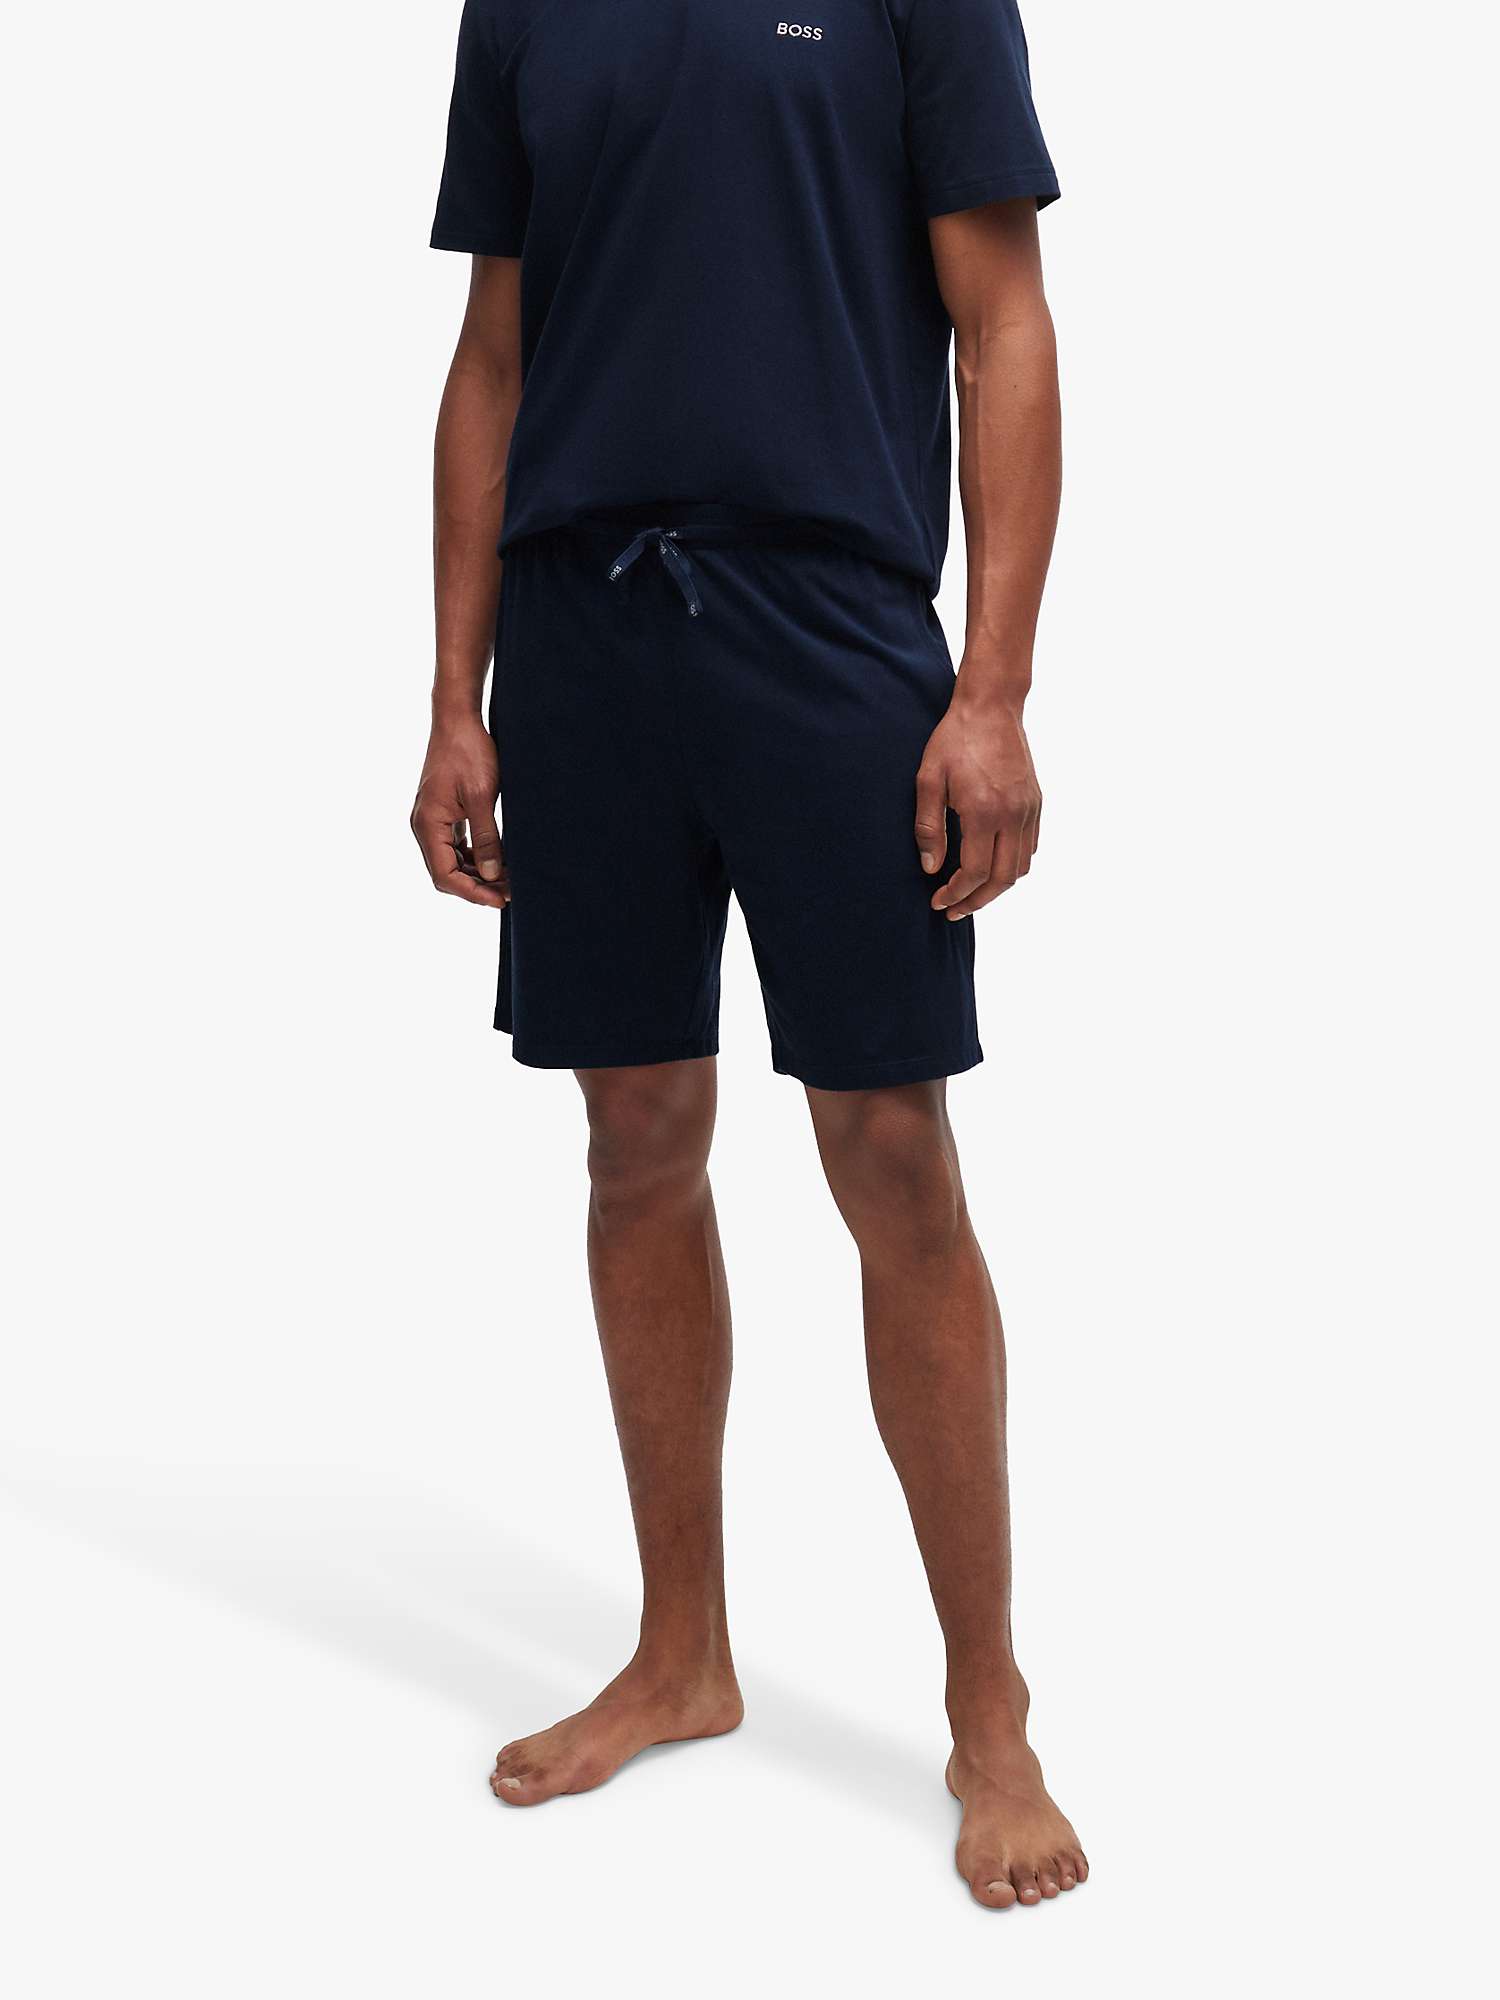 Buy BOSS Mix&Match Embroidered Logo Shorts Online at johnlewis.com